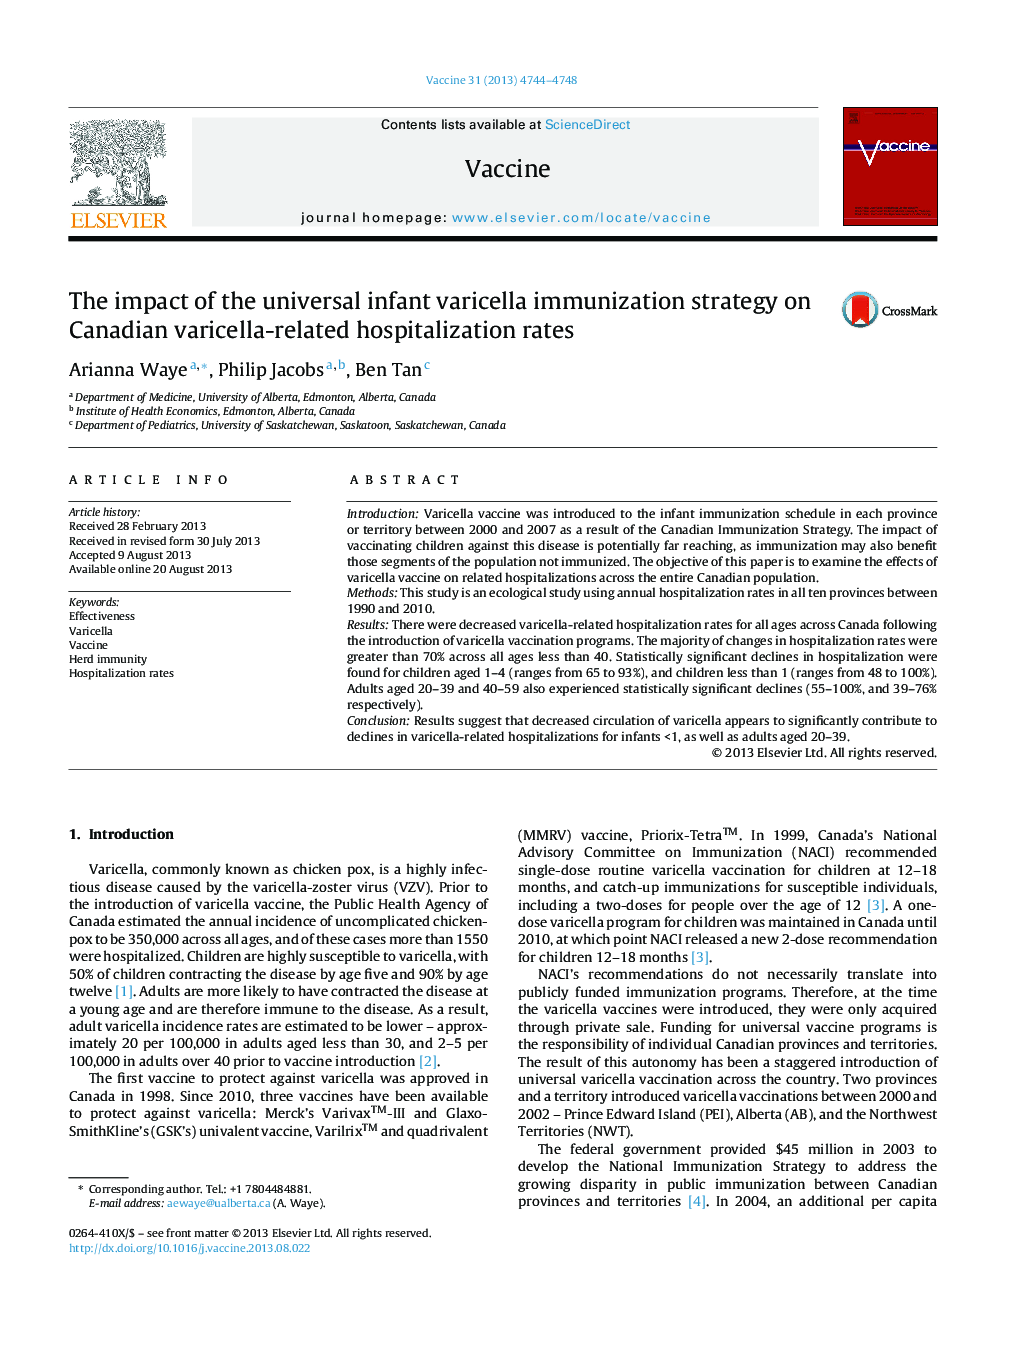 The impact of the universal infant varicella immunization strategy on Canadian varicella-related hospitalization rates